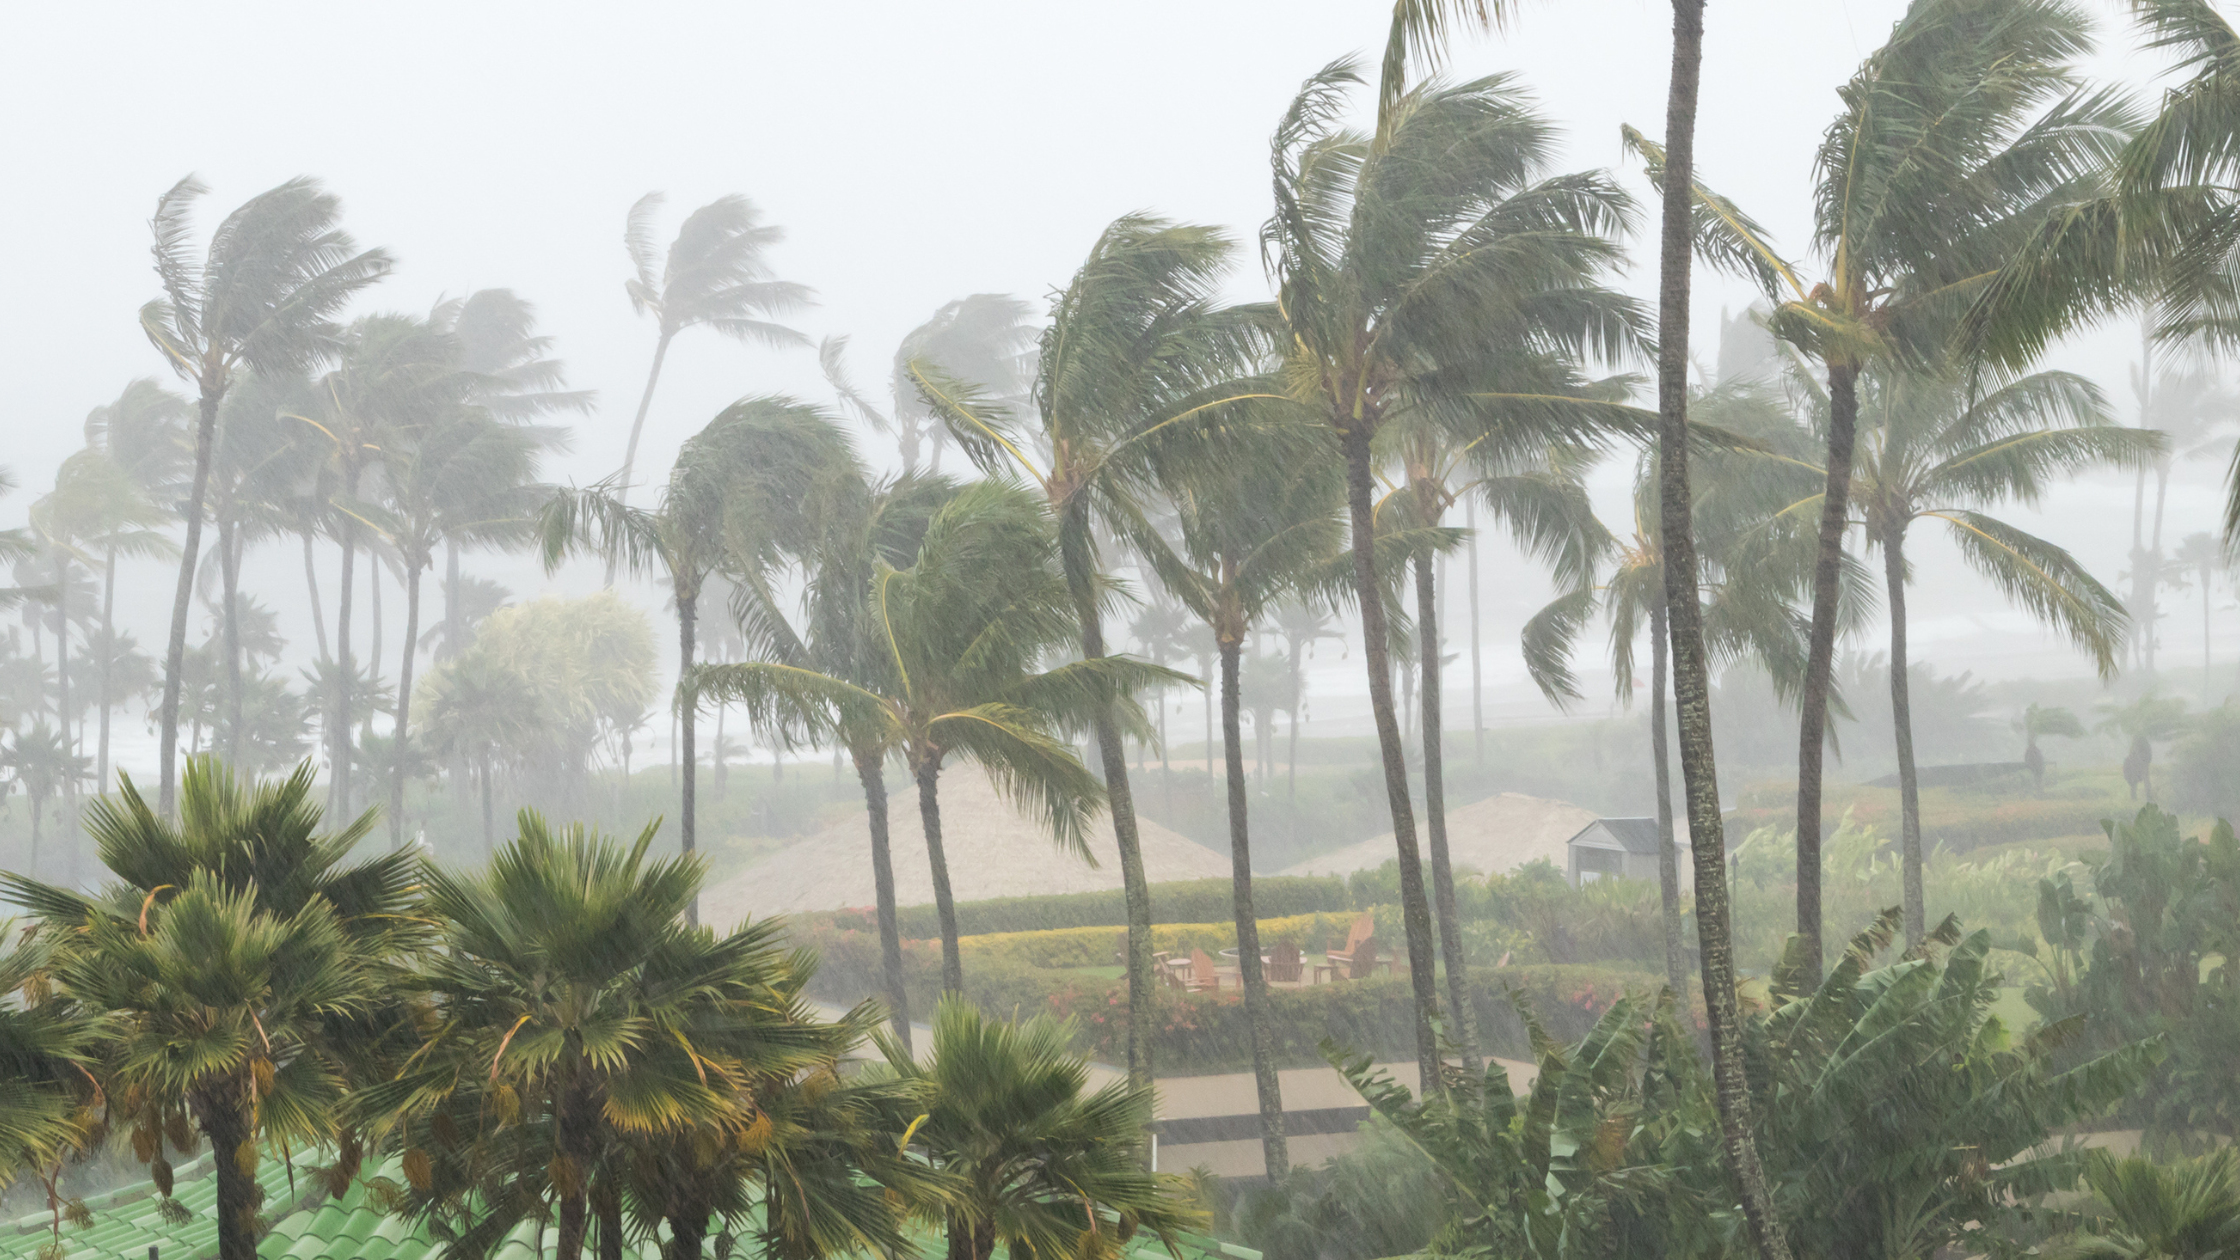 Palm trees in a hurricane